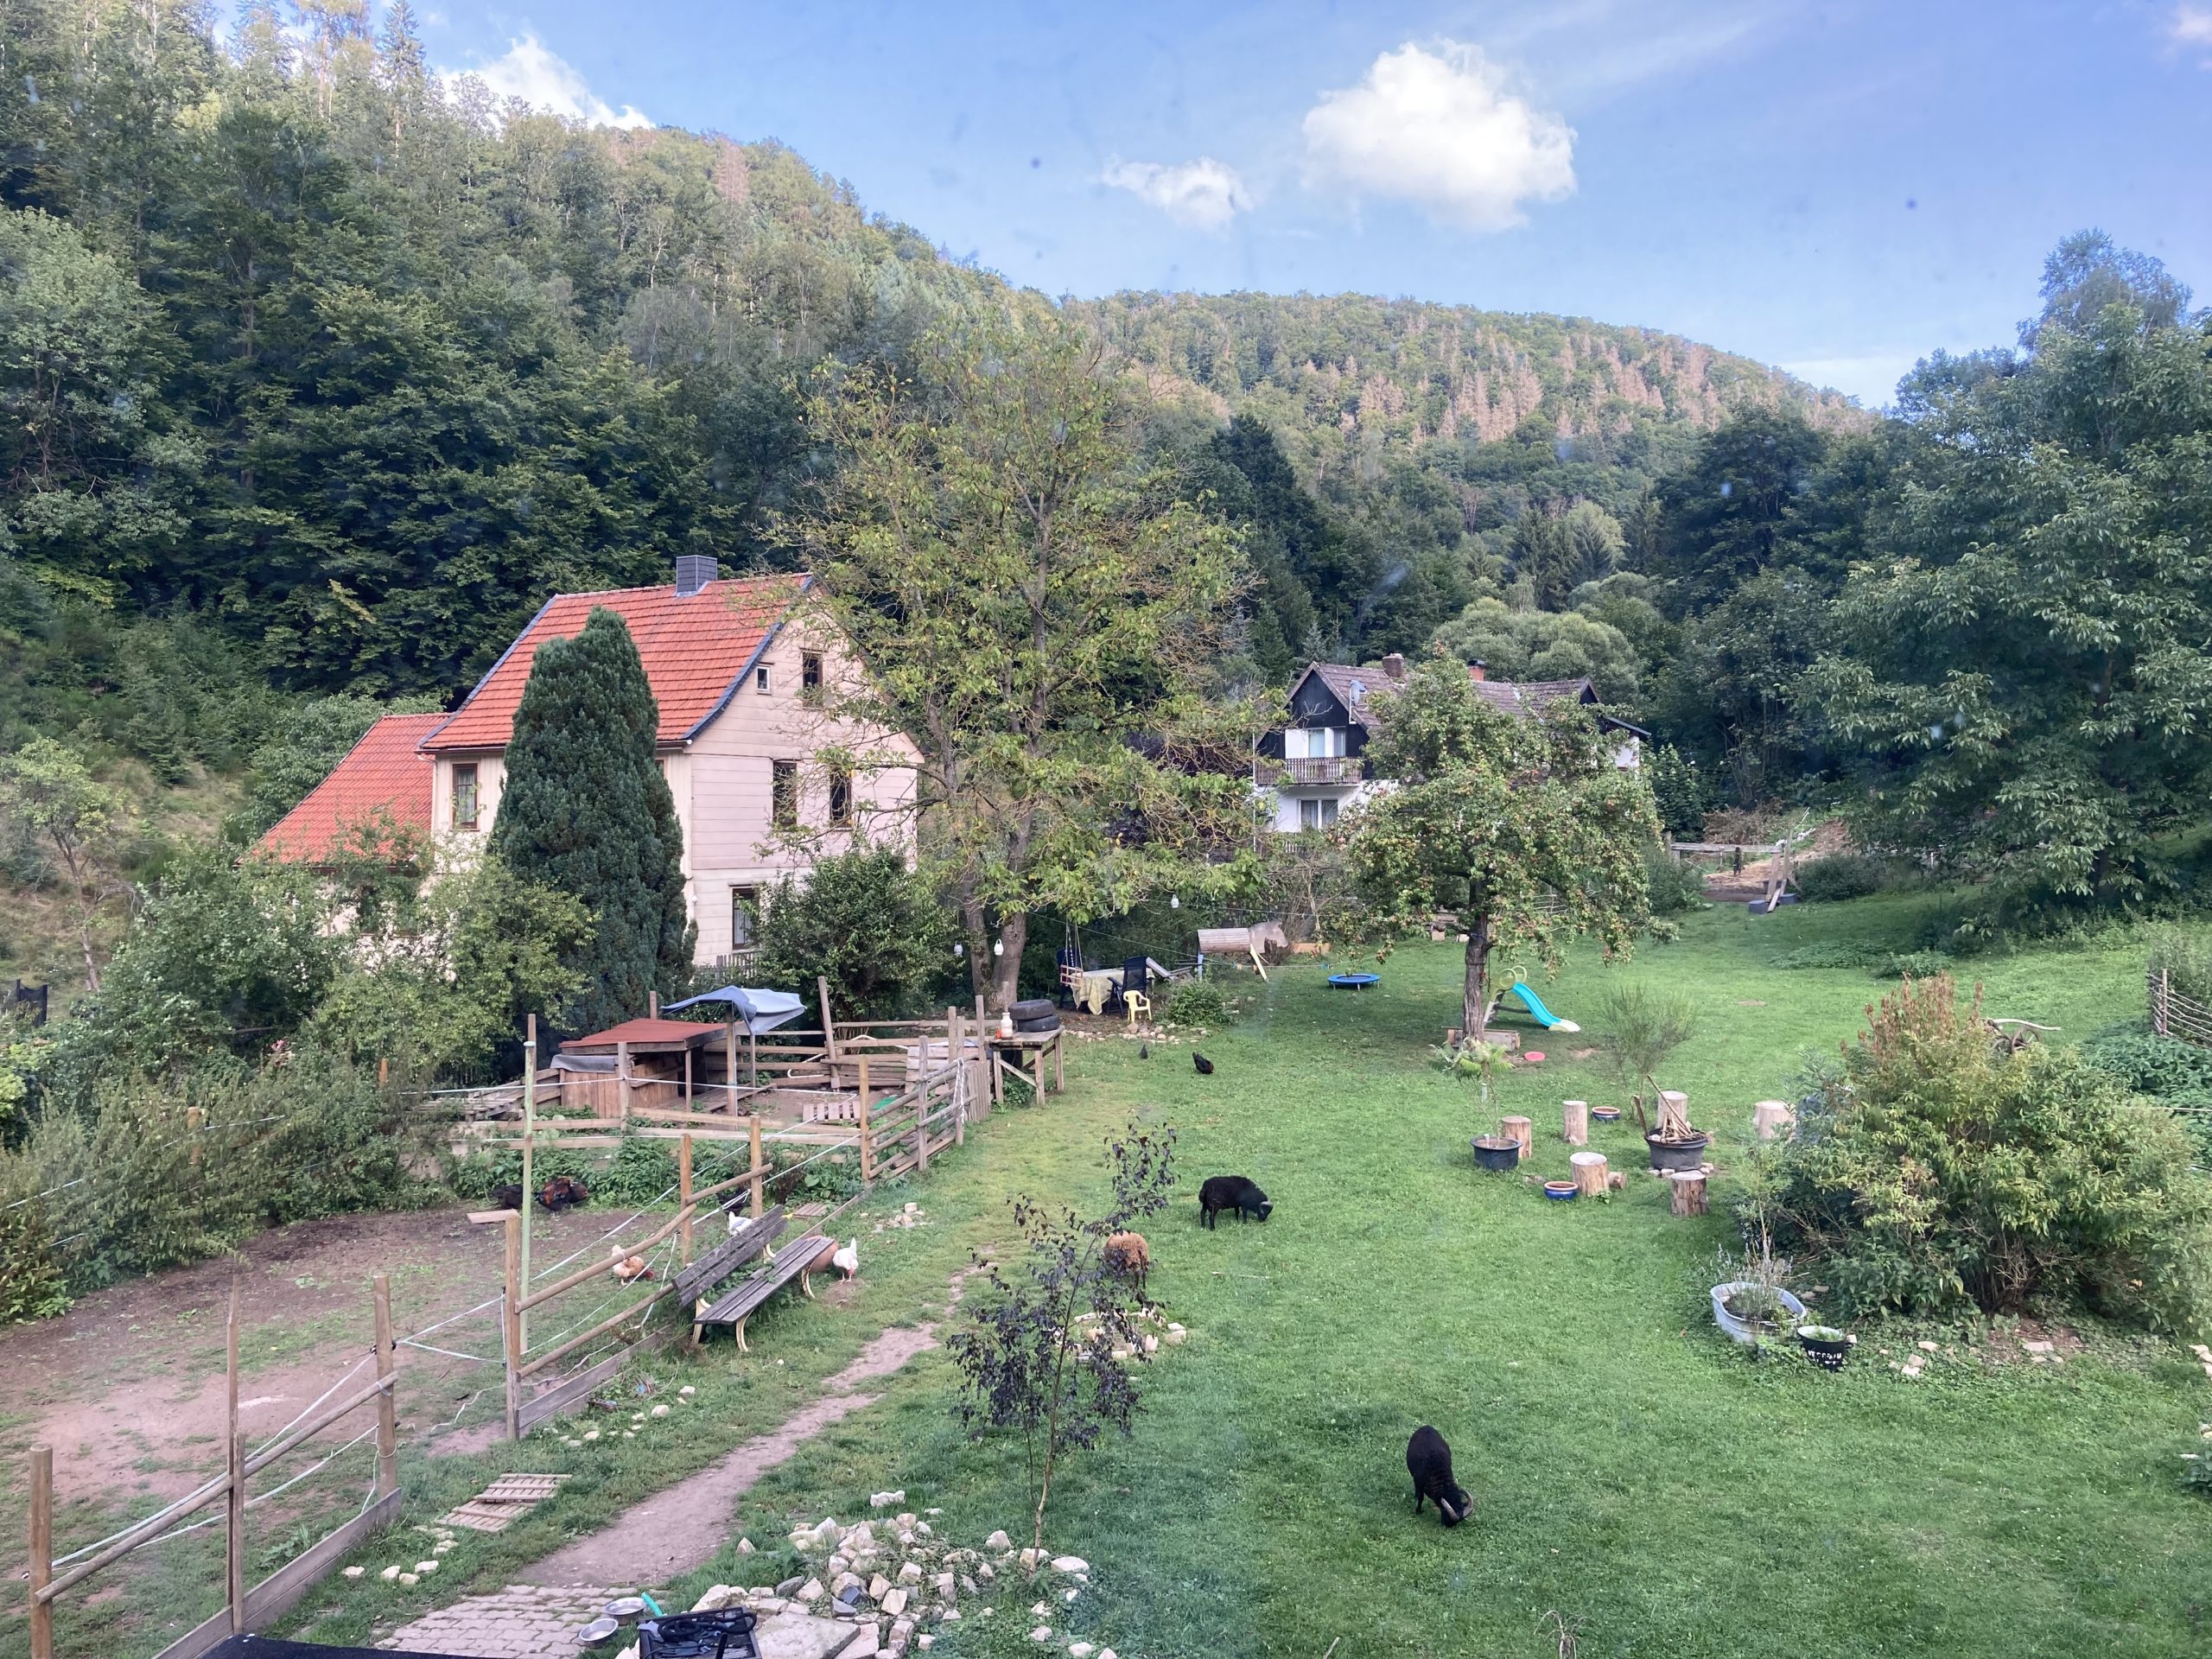 garden at the foot of the mountains in Zorge